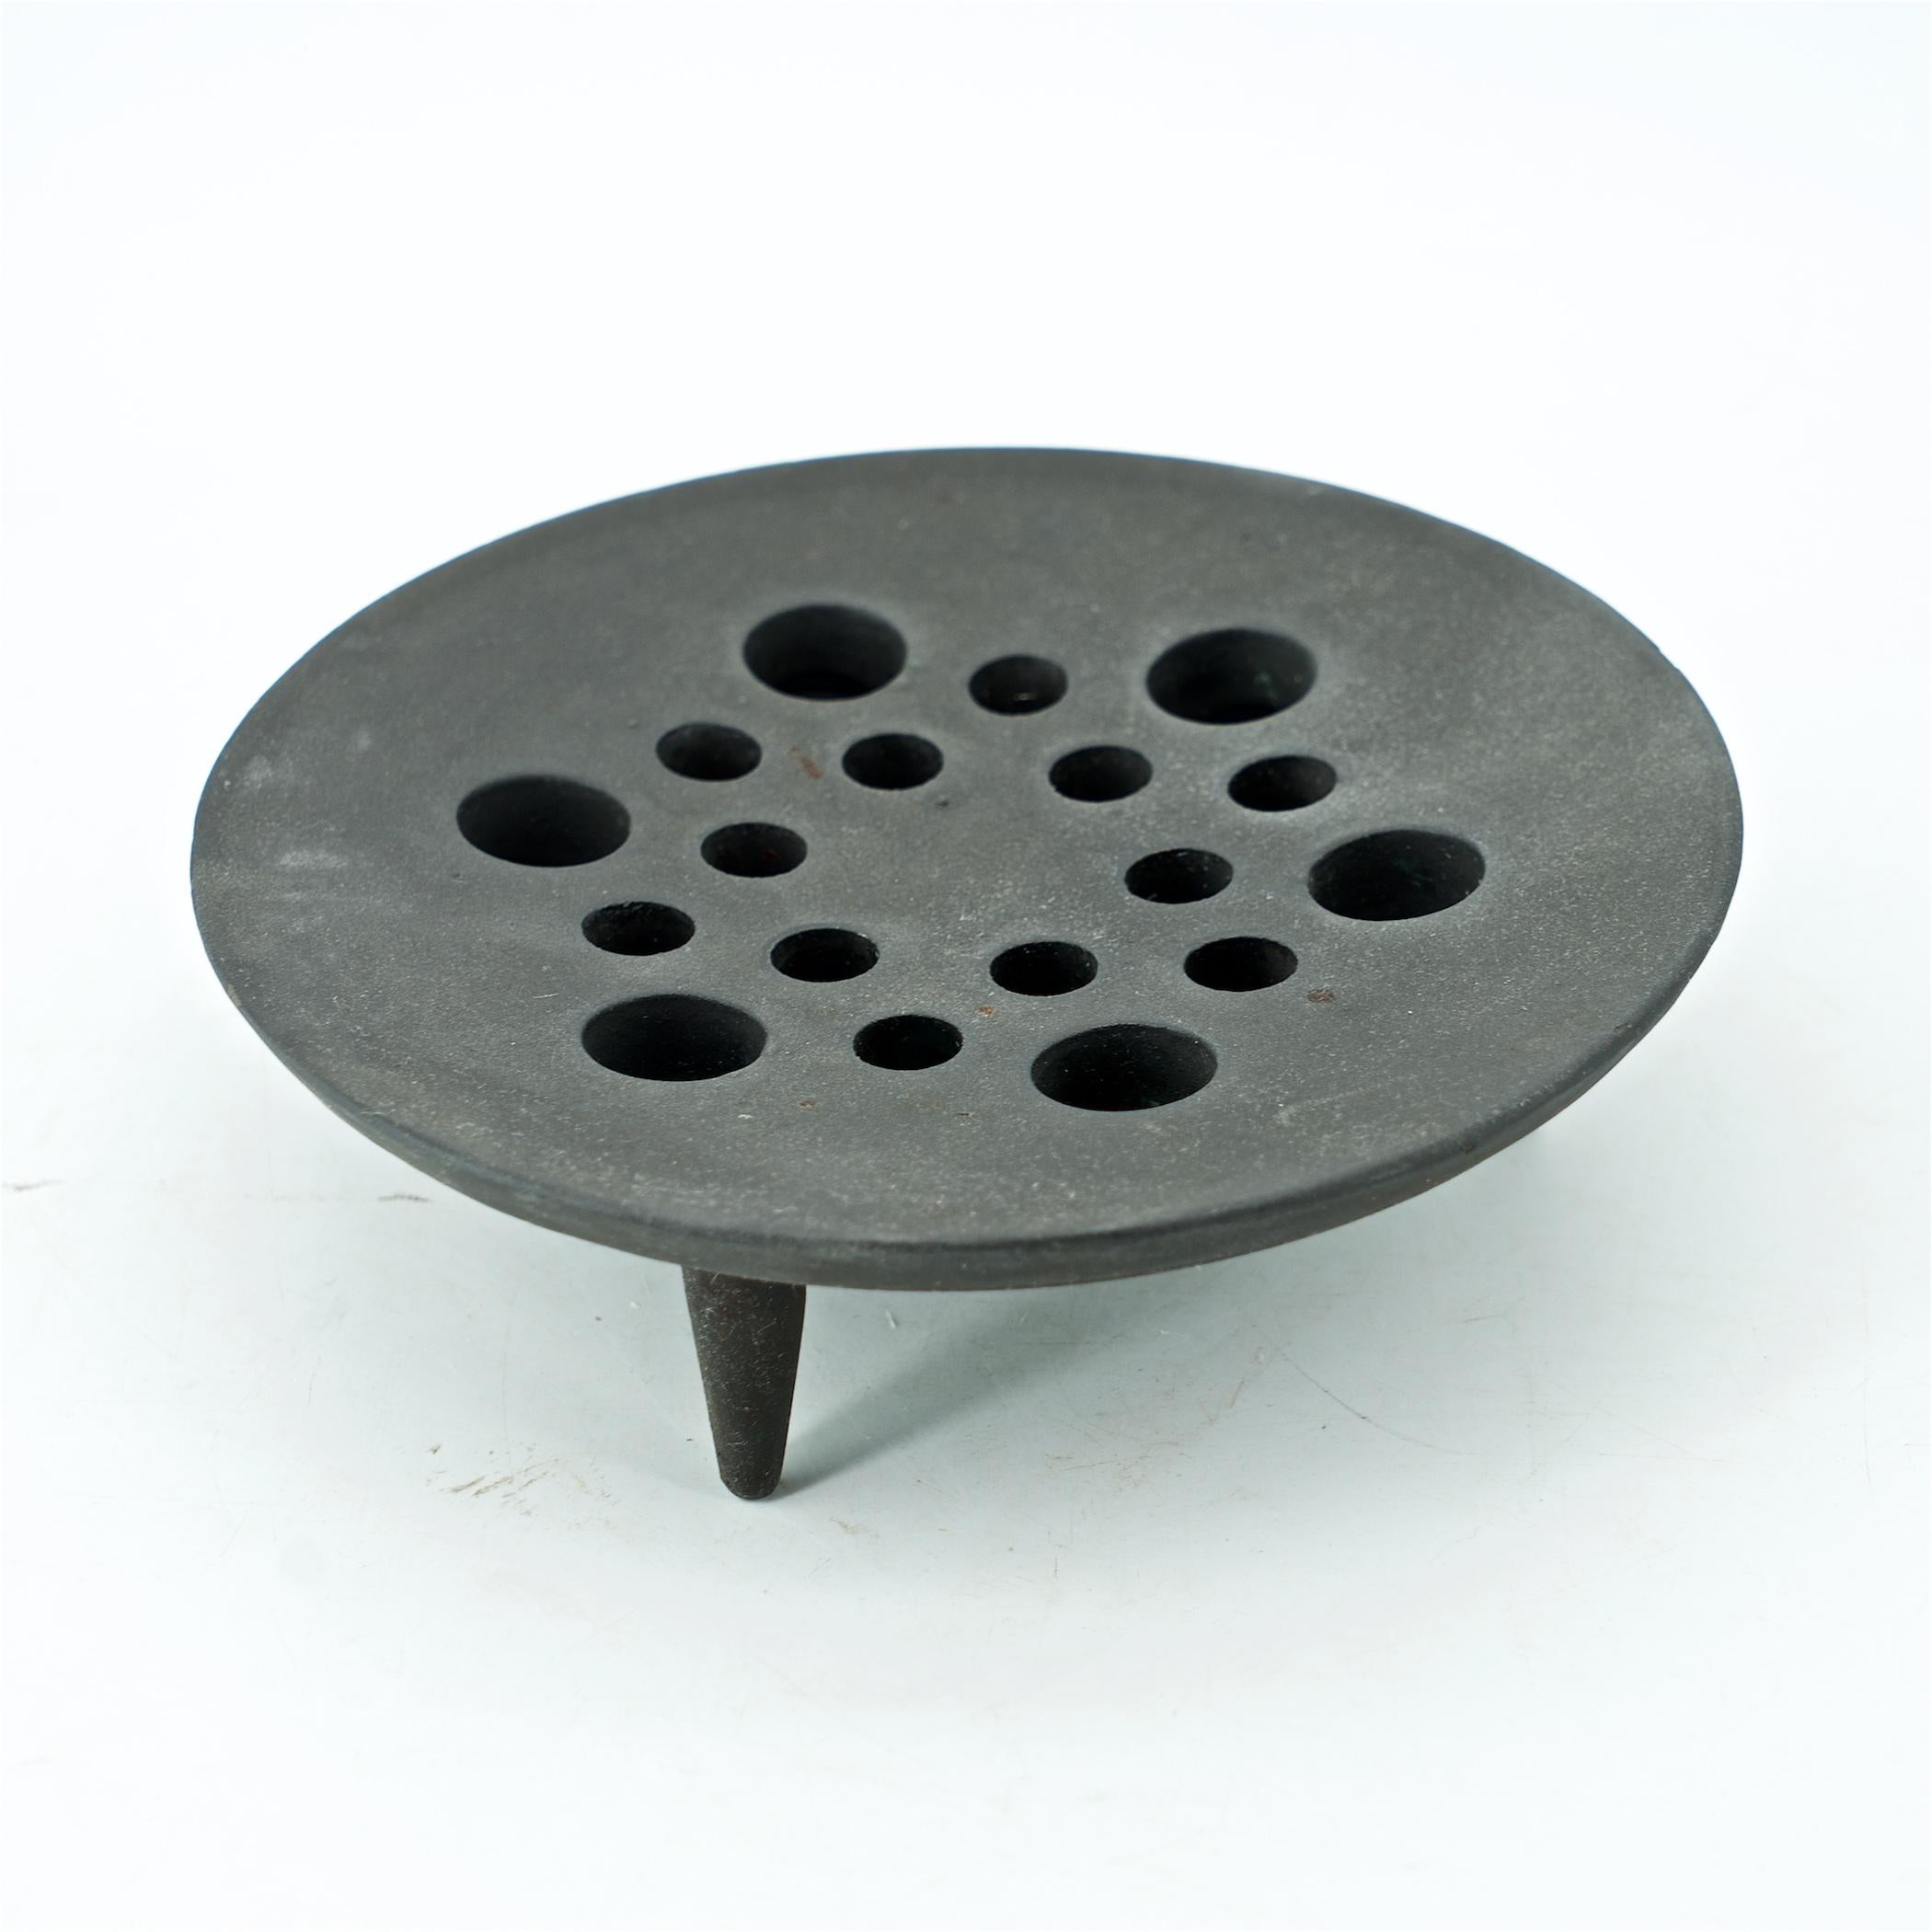 Uncommon form. Very matte grey/black, 2-piece, cast iron candelabra or dish with pierced lid. Heavy little table decor. Weighs just over 5.5 lbs.